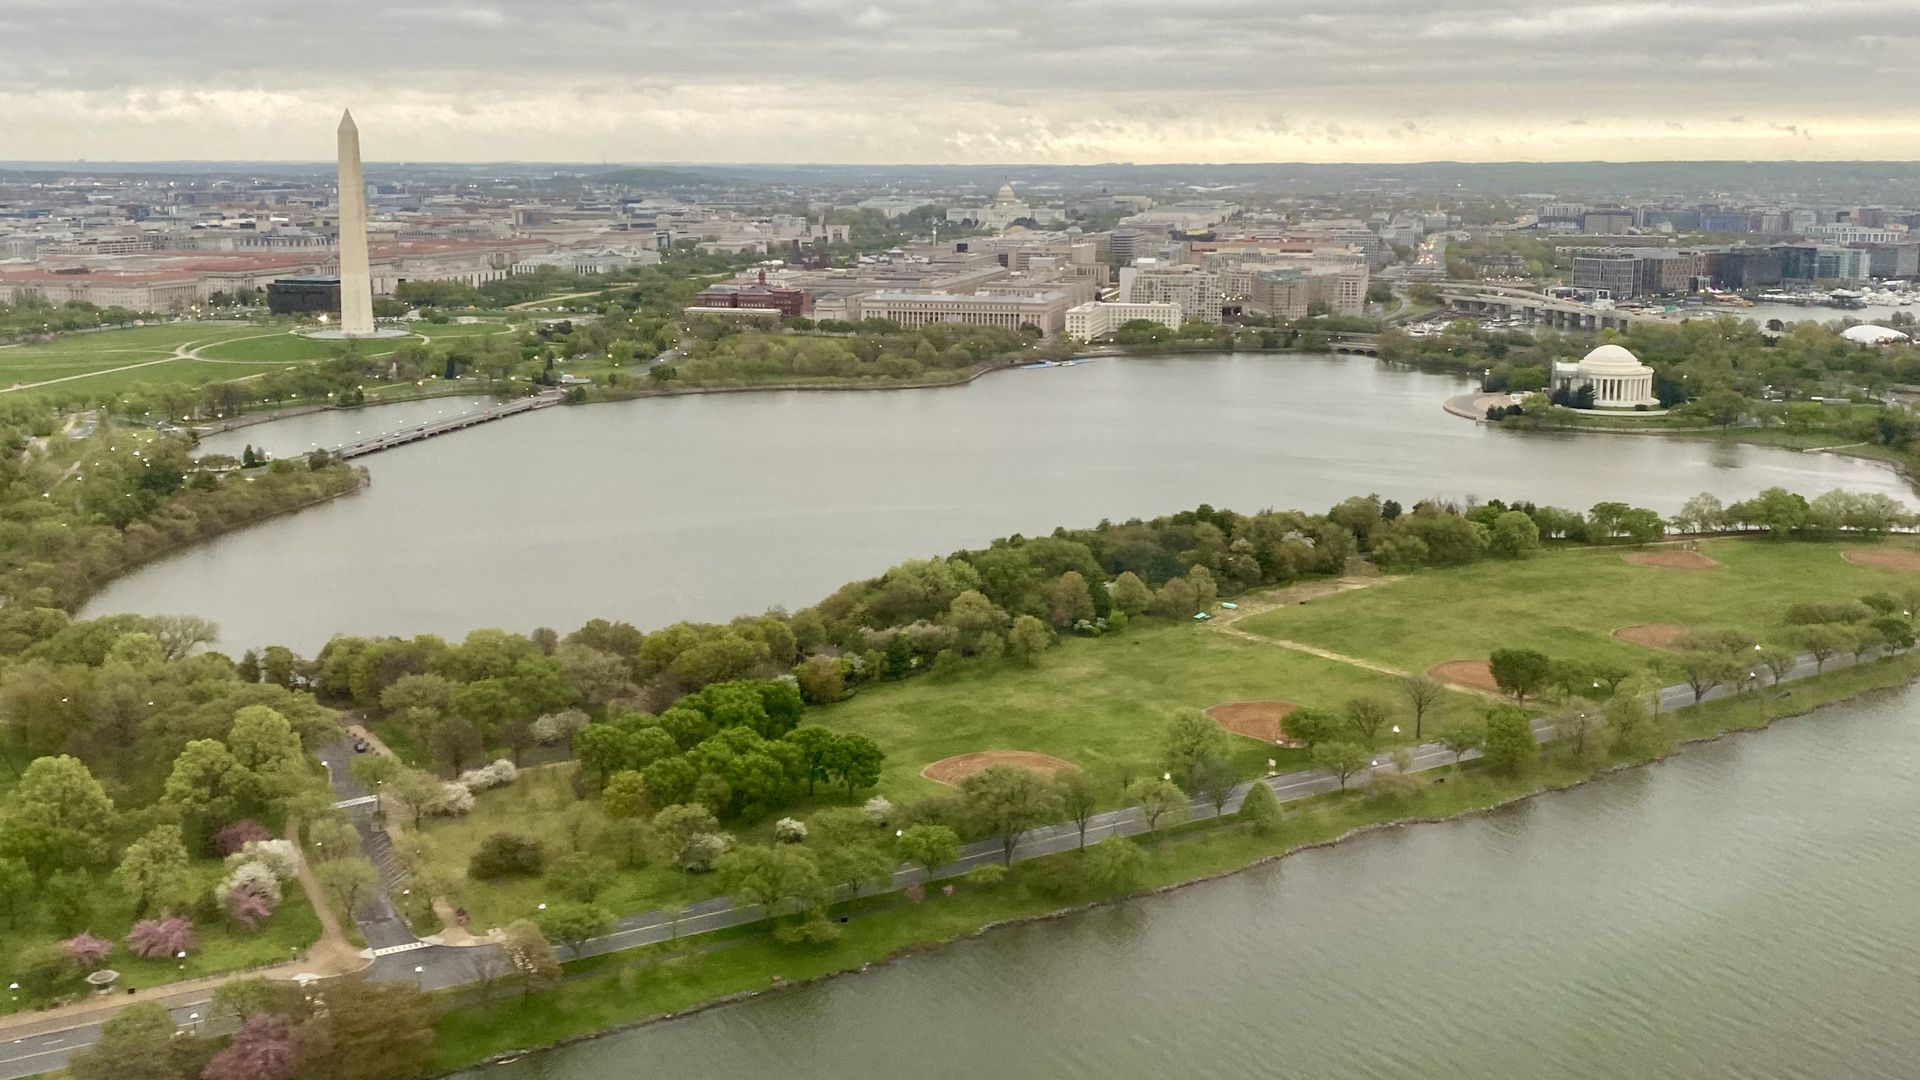 The Tidal Basin and Washington Monument are seen from an airplane on approach to Reagan National.